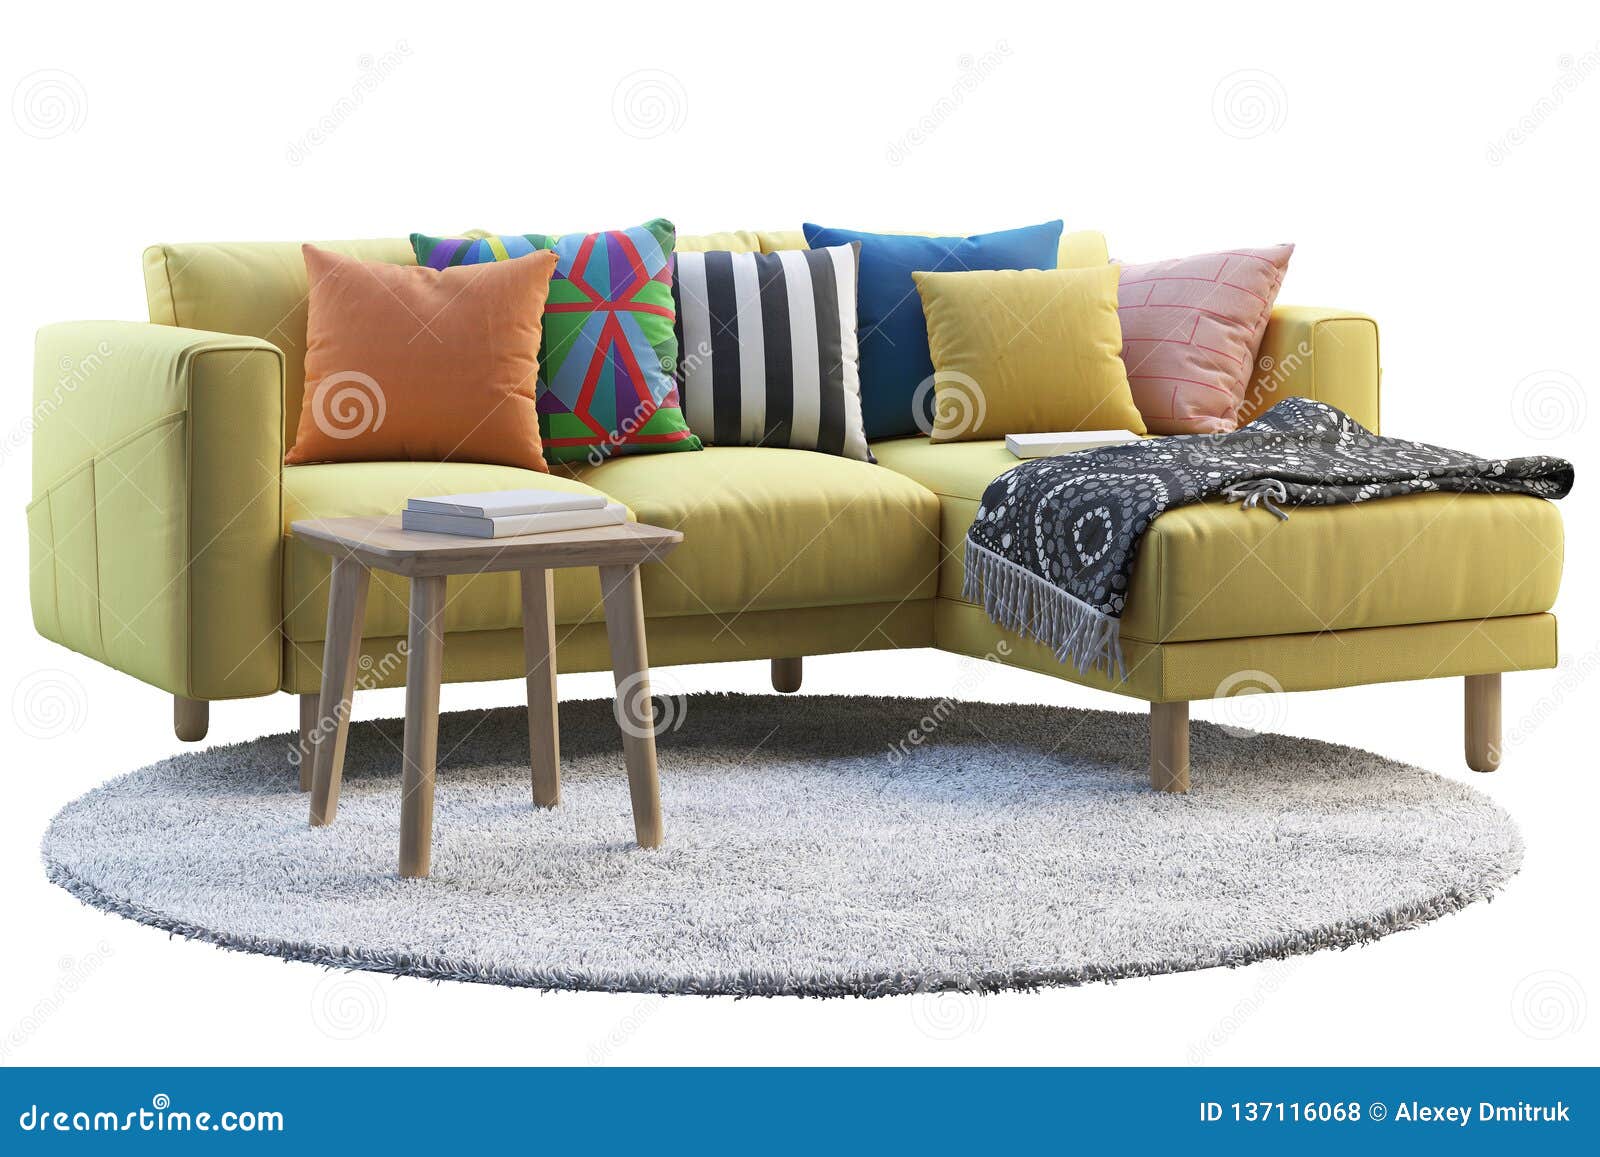 Yellow Fabric Sofa With Gray Rug And Wooden Coffee Table 3d Render Stock Illustration Illustration Of Glass Fabric 137115992